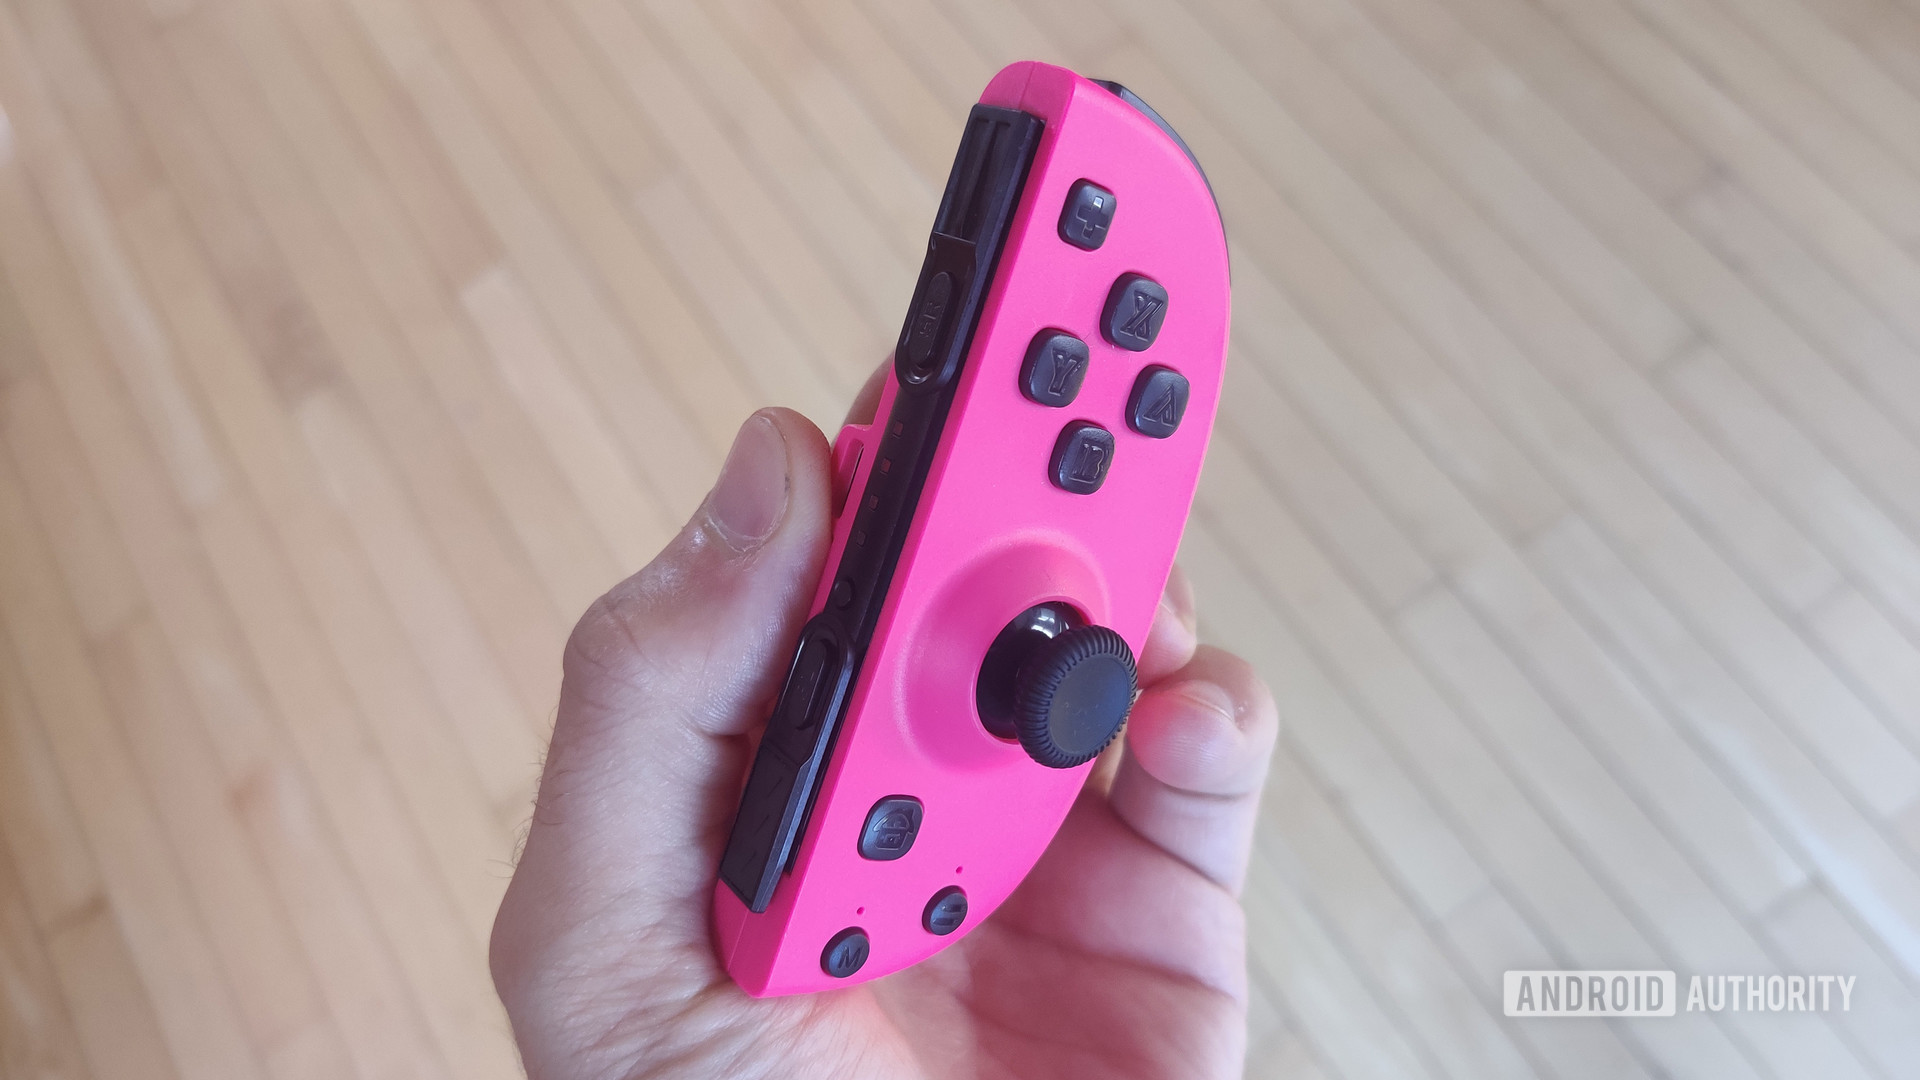 Esywen Joypad Controller for Nintendo Switch Review Buttons